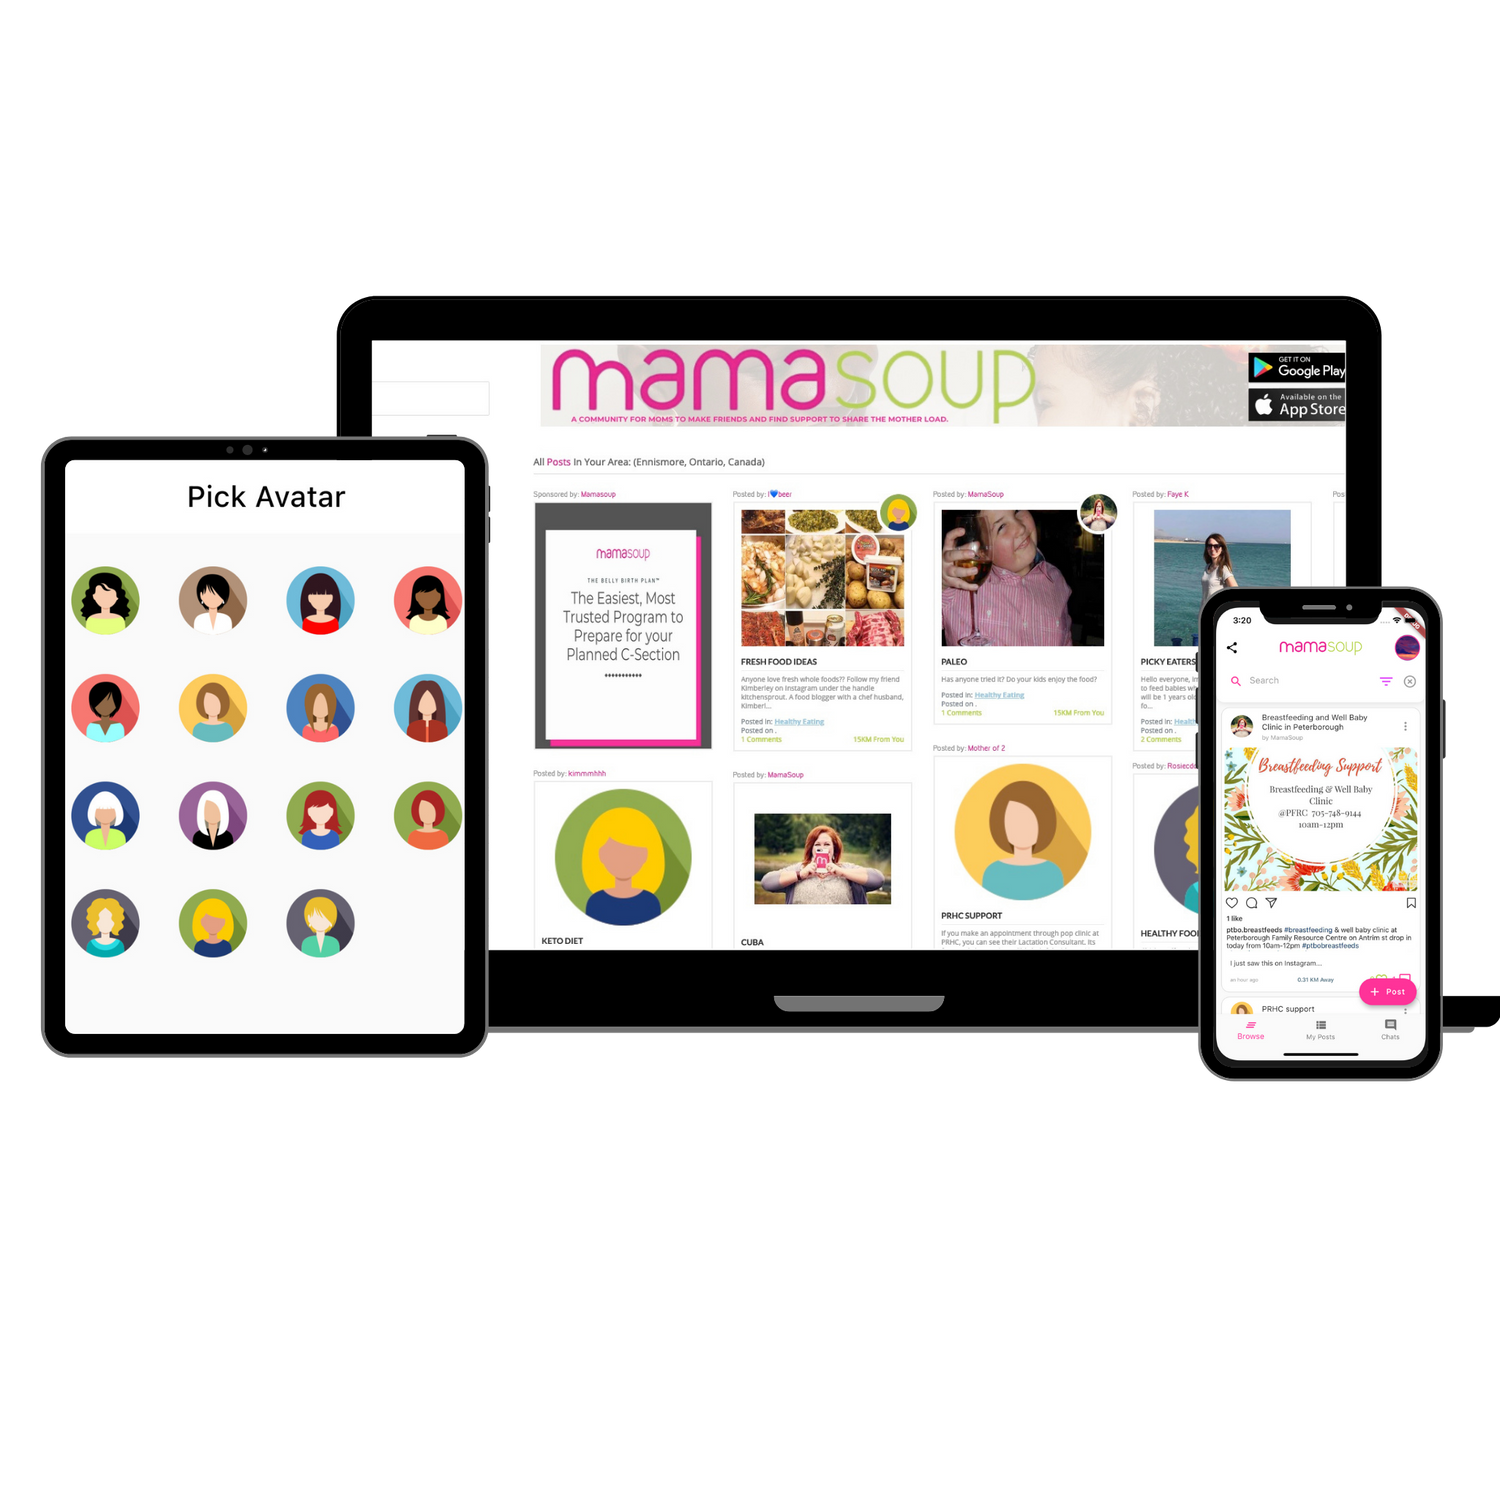 a video tutorial showing how the mamasoup social media app for new moms can reduce loneliness and isolation and connect moms to an online community